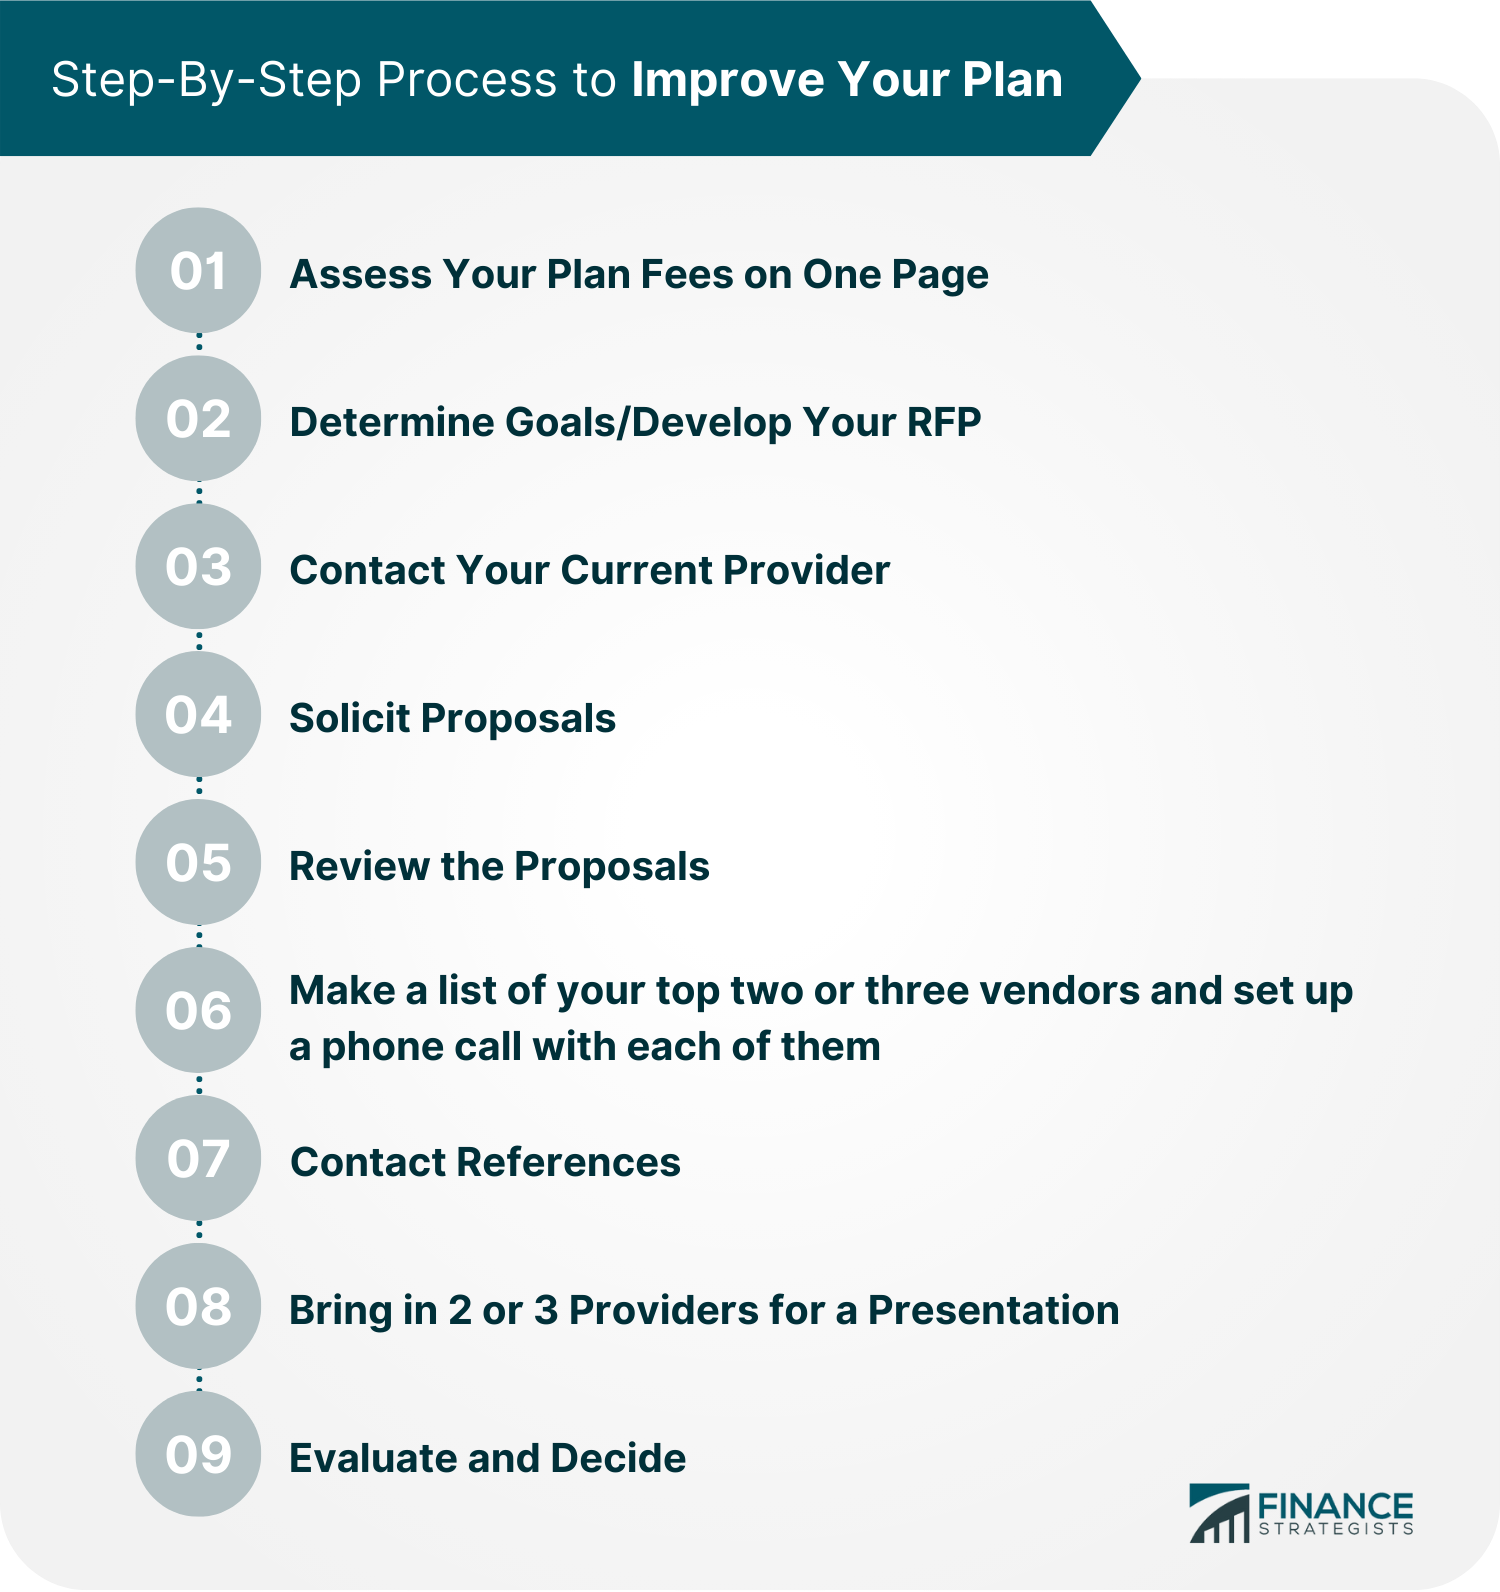 Step-By-Step Process to Improve Your Plan